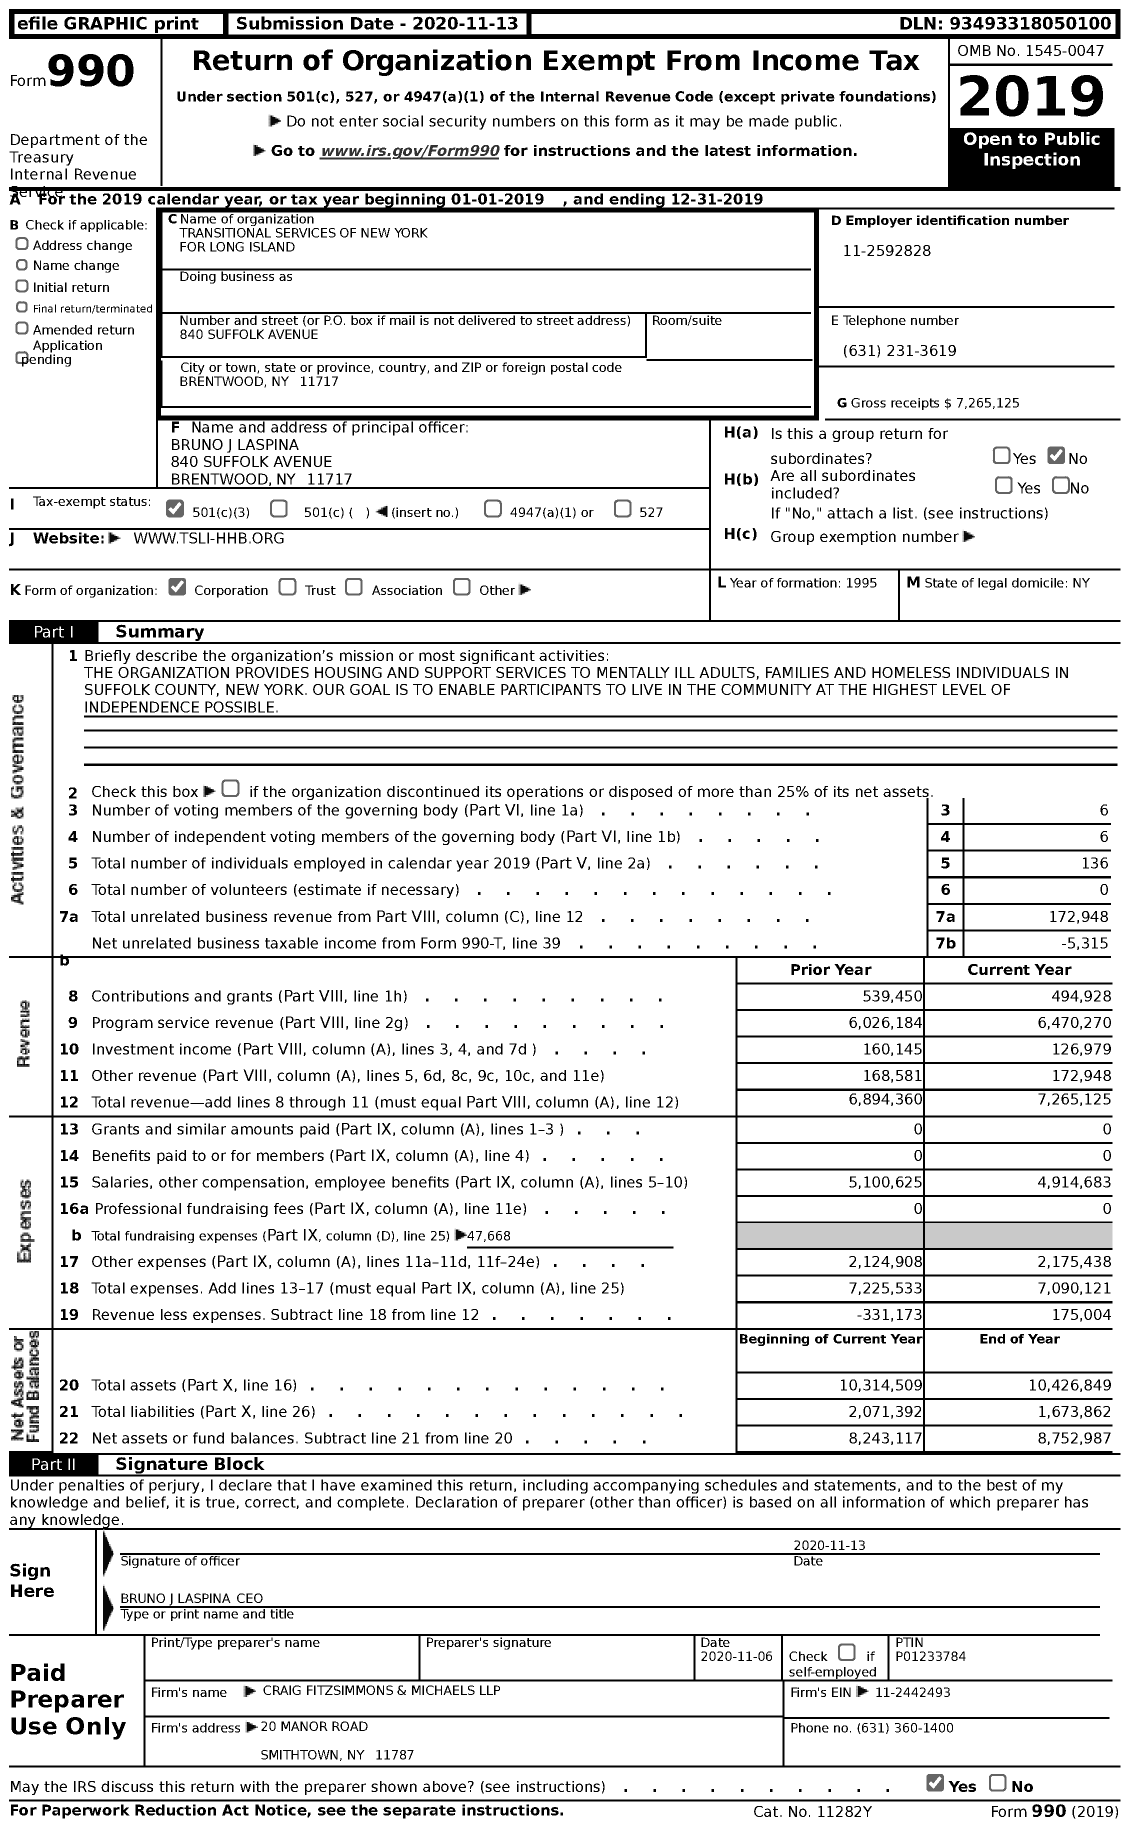 Image of first page of 2019 Form 990 for Transitional Services of New York for Long Island (TSLI)